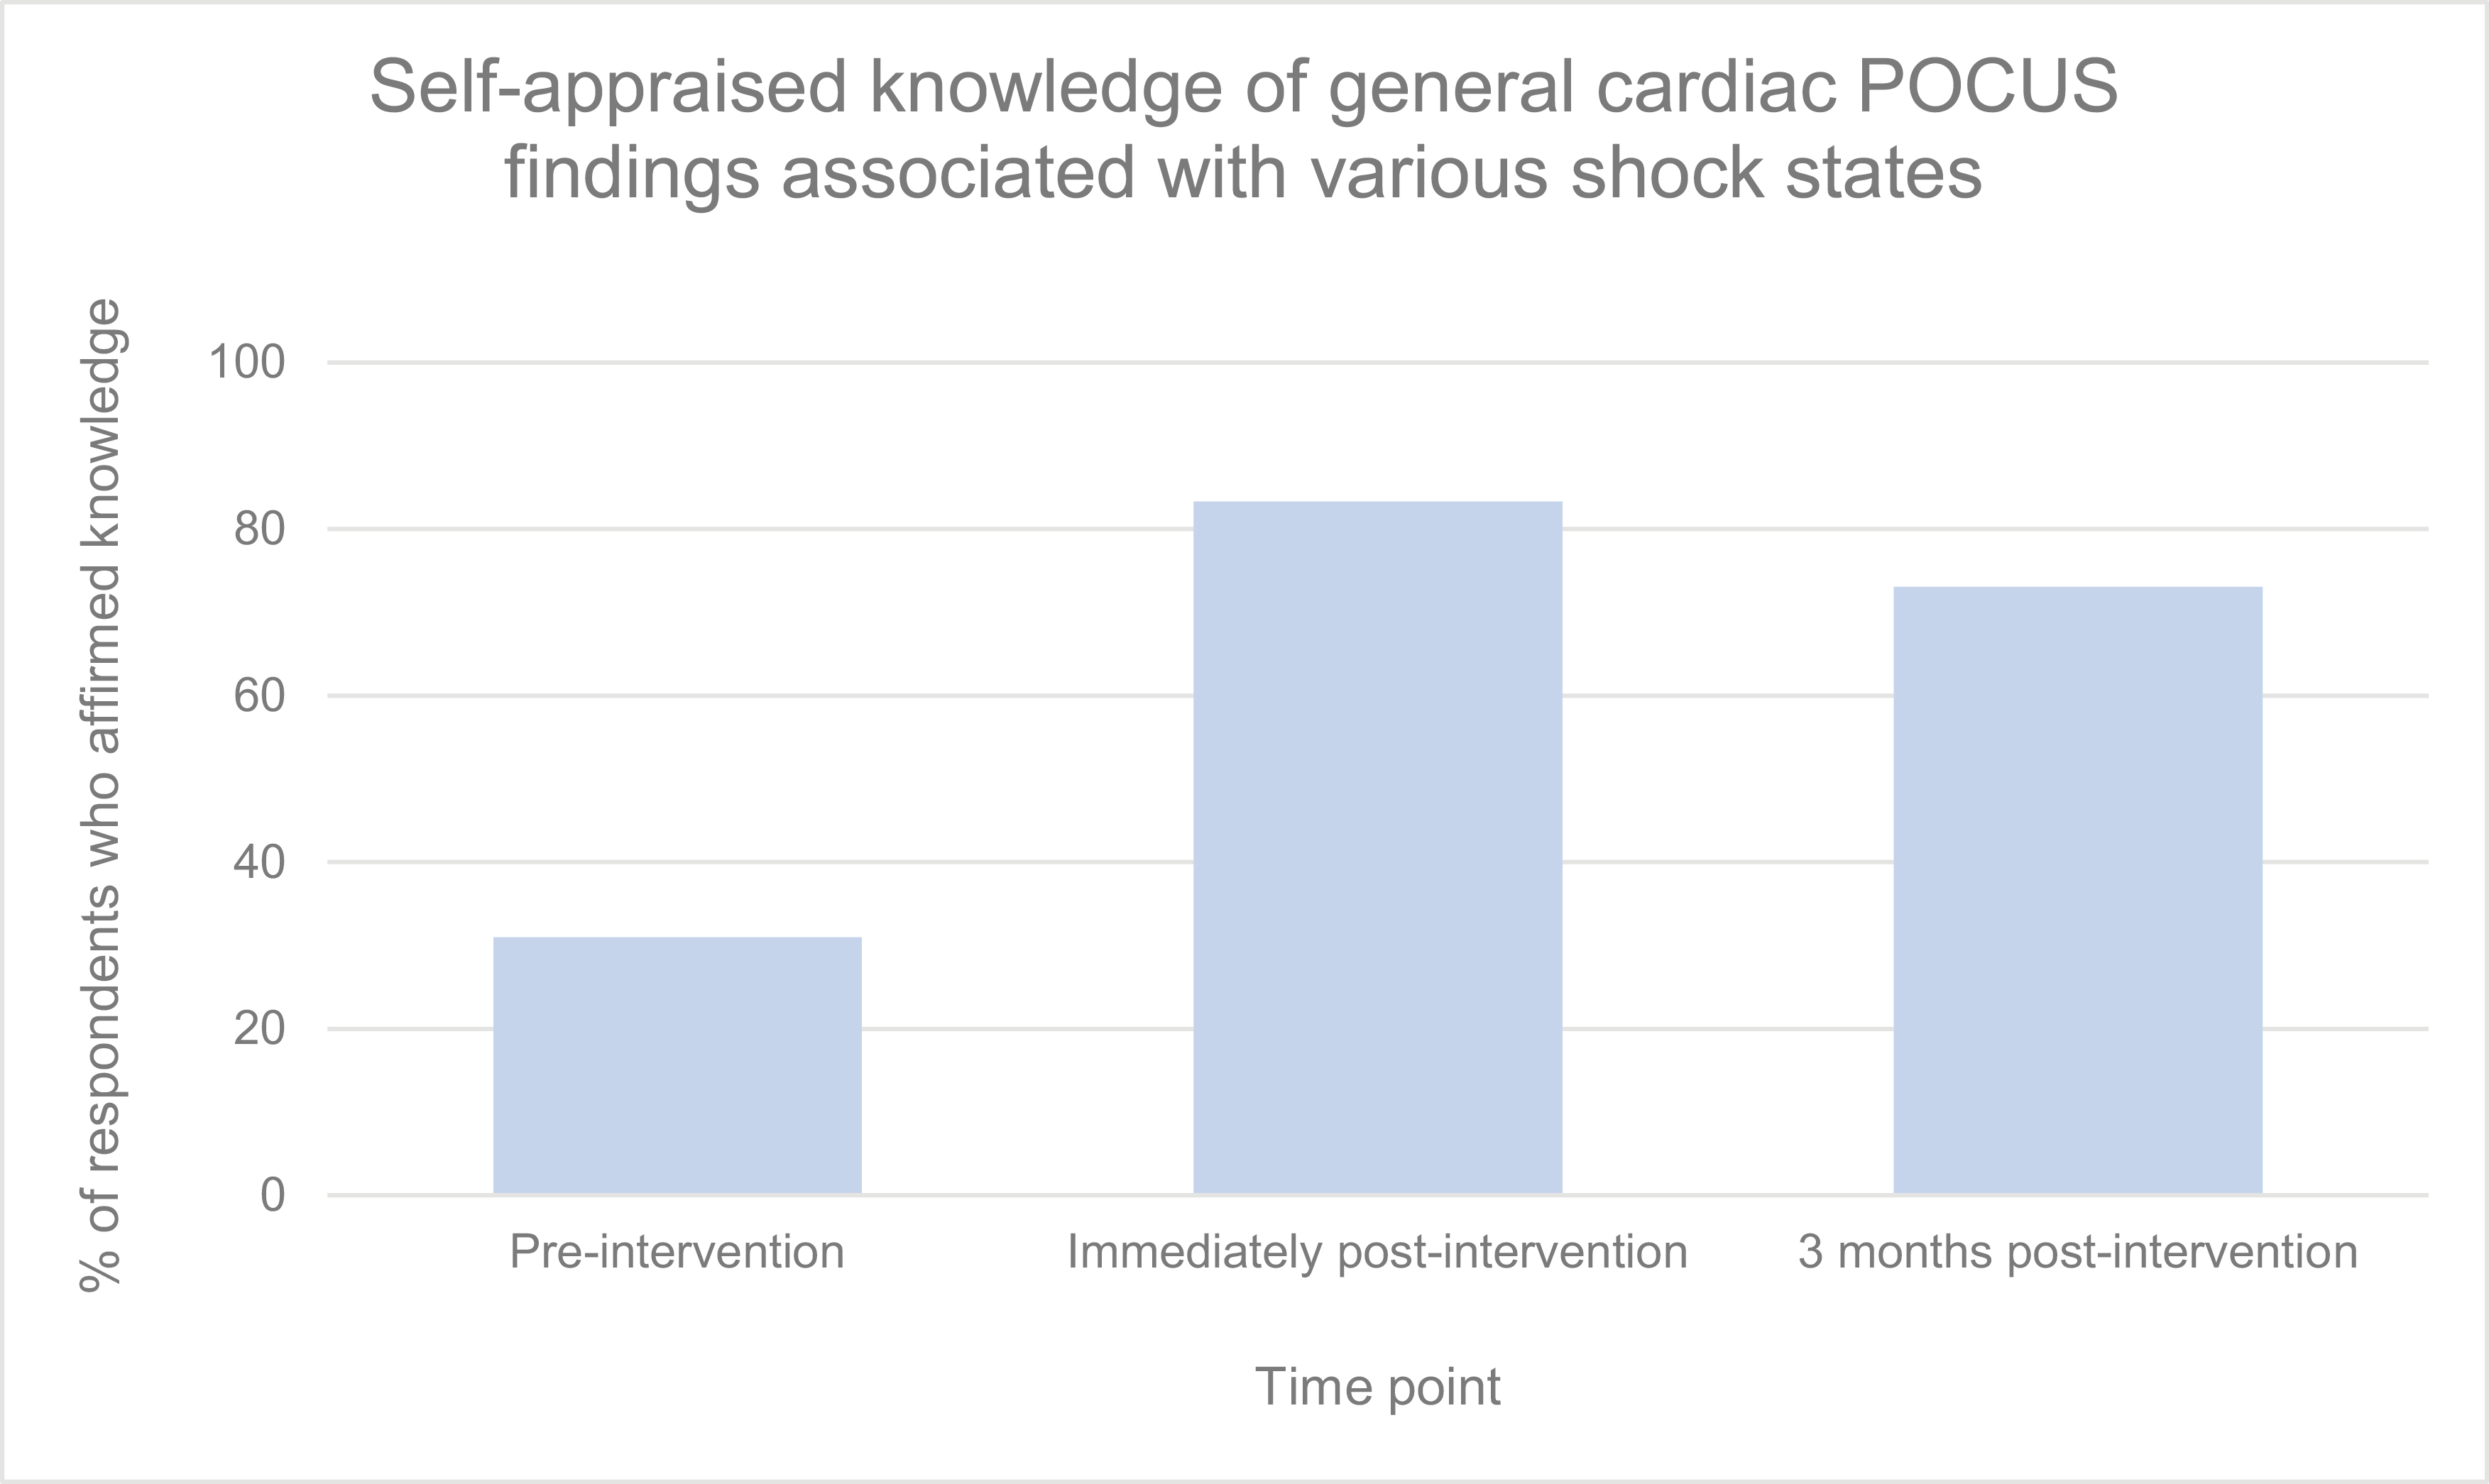 Percentage of respondents who stated that they knew the general cardiac POCUS findings associated with various shock states (assuming no mixed shock state) at each time point